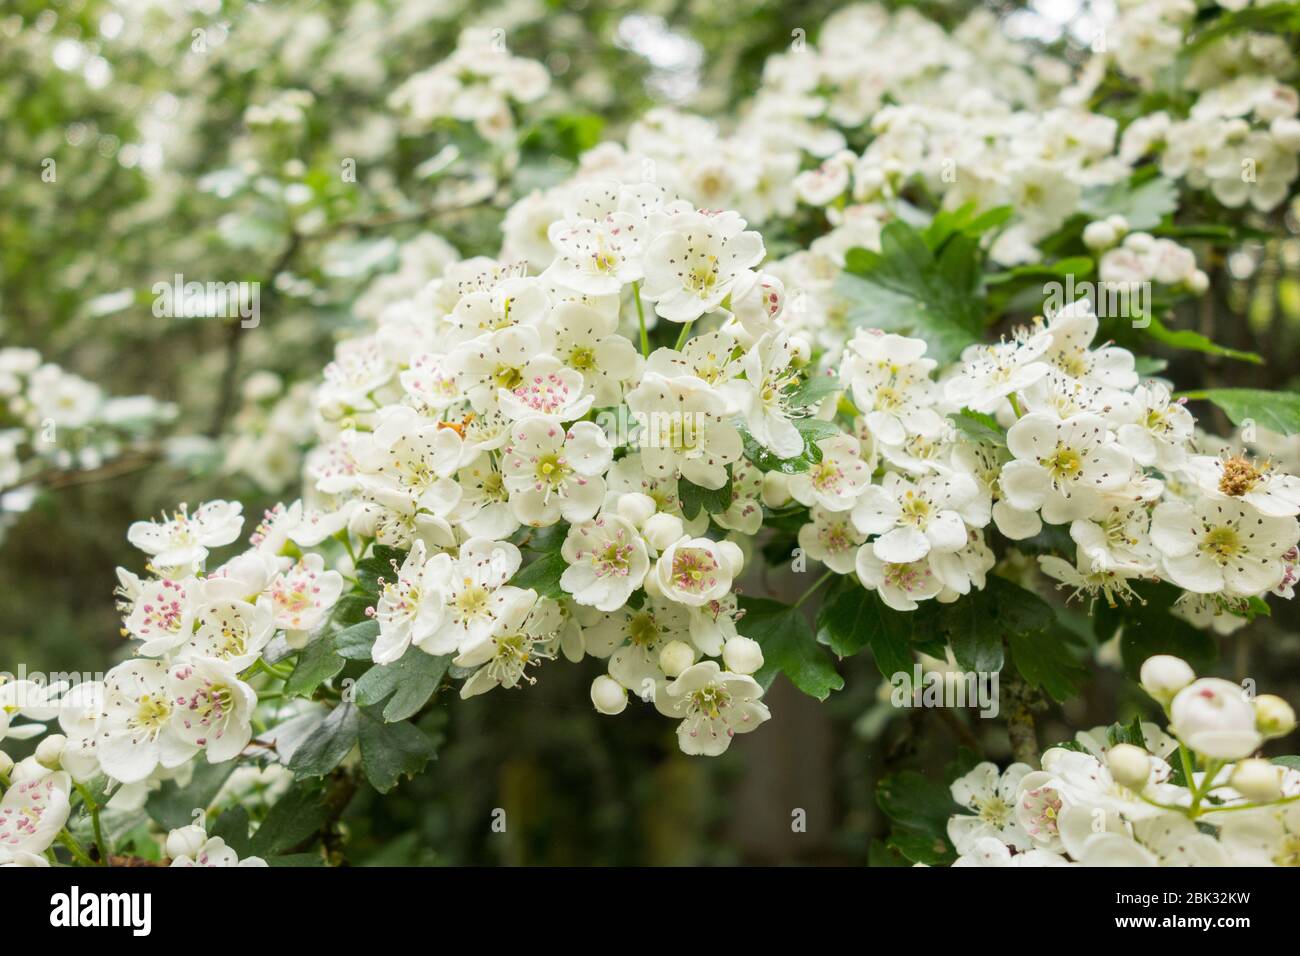 Close-up of a White Hawthorn blossom (Rosaceae) Stock Photo